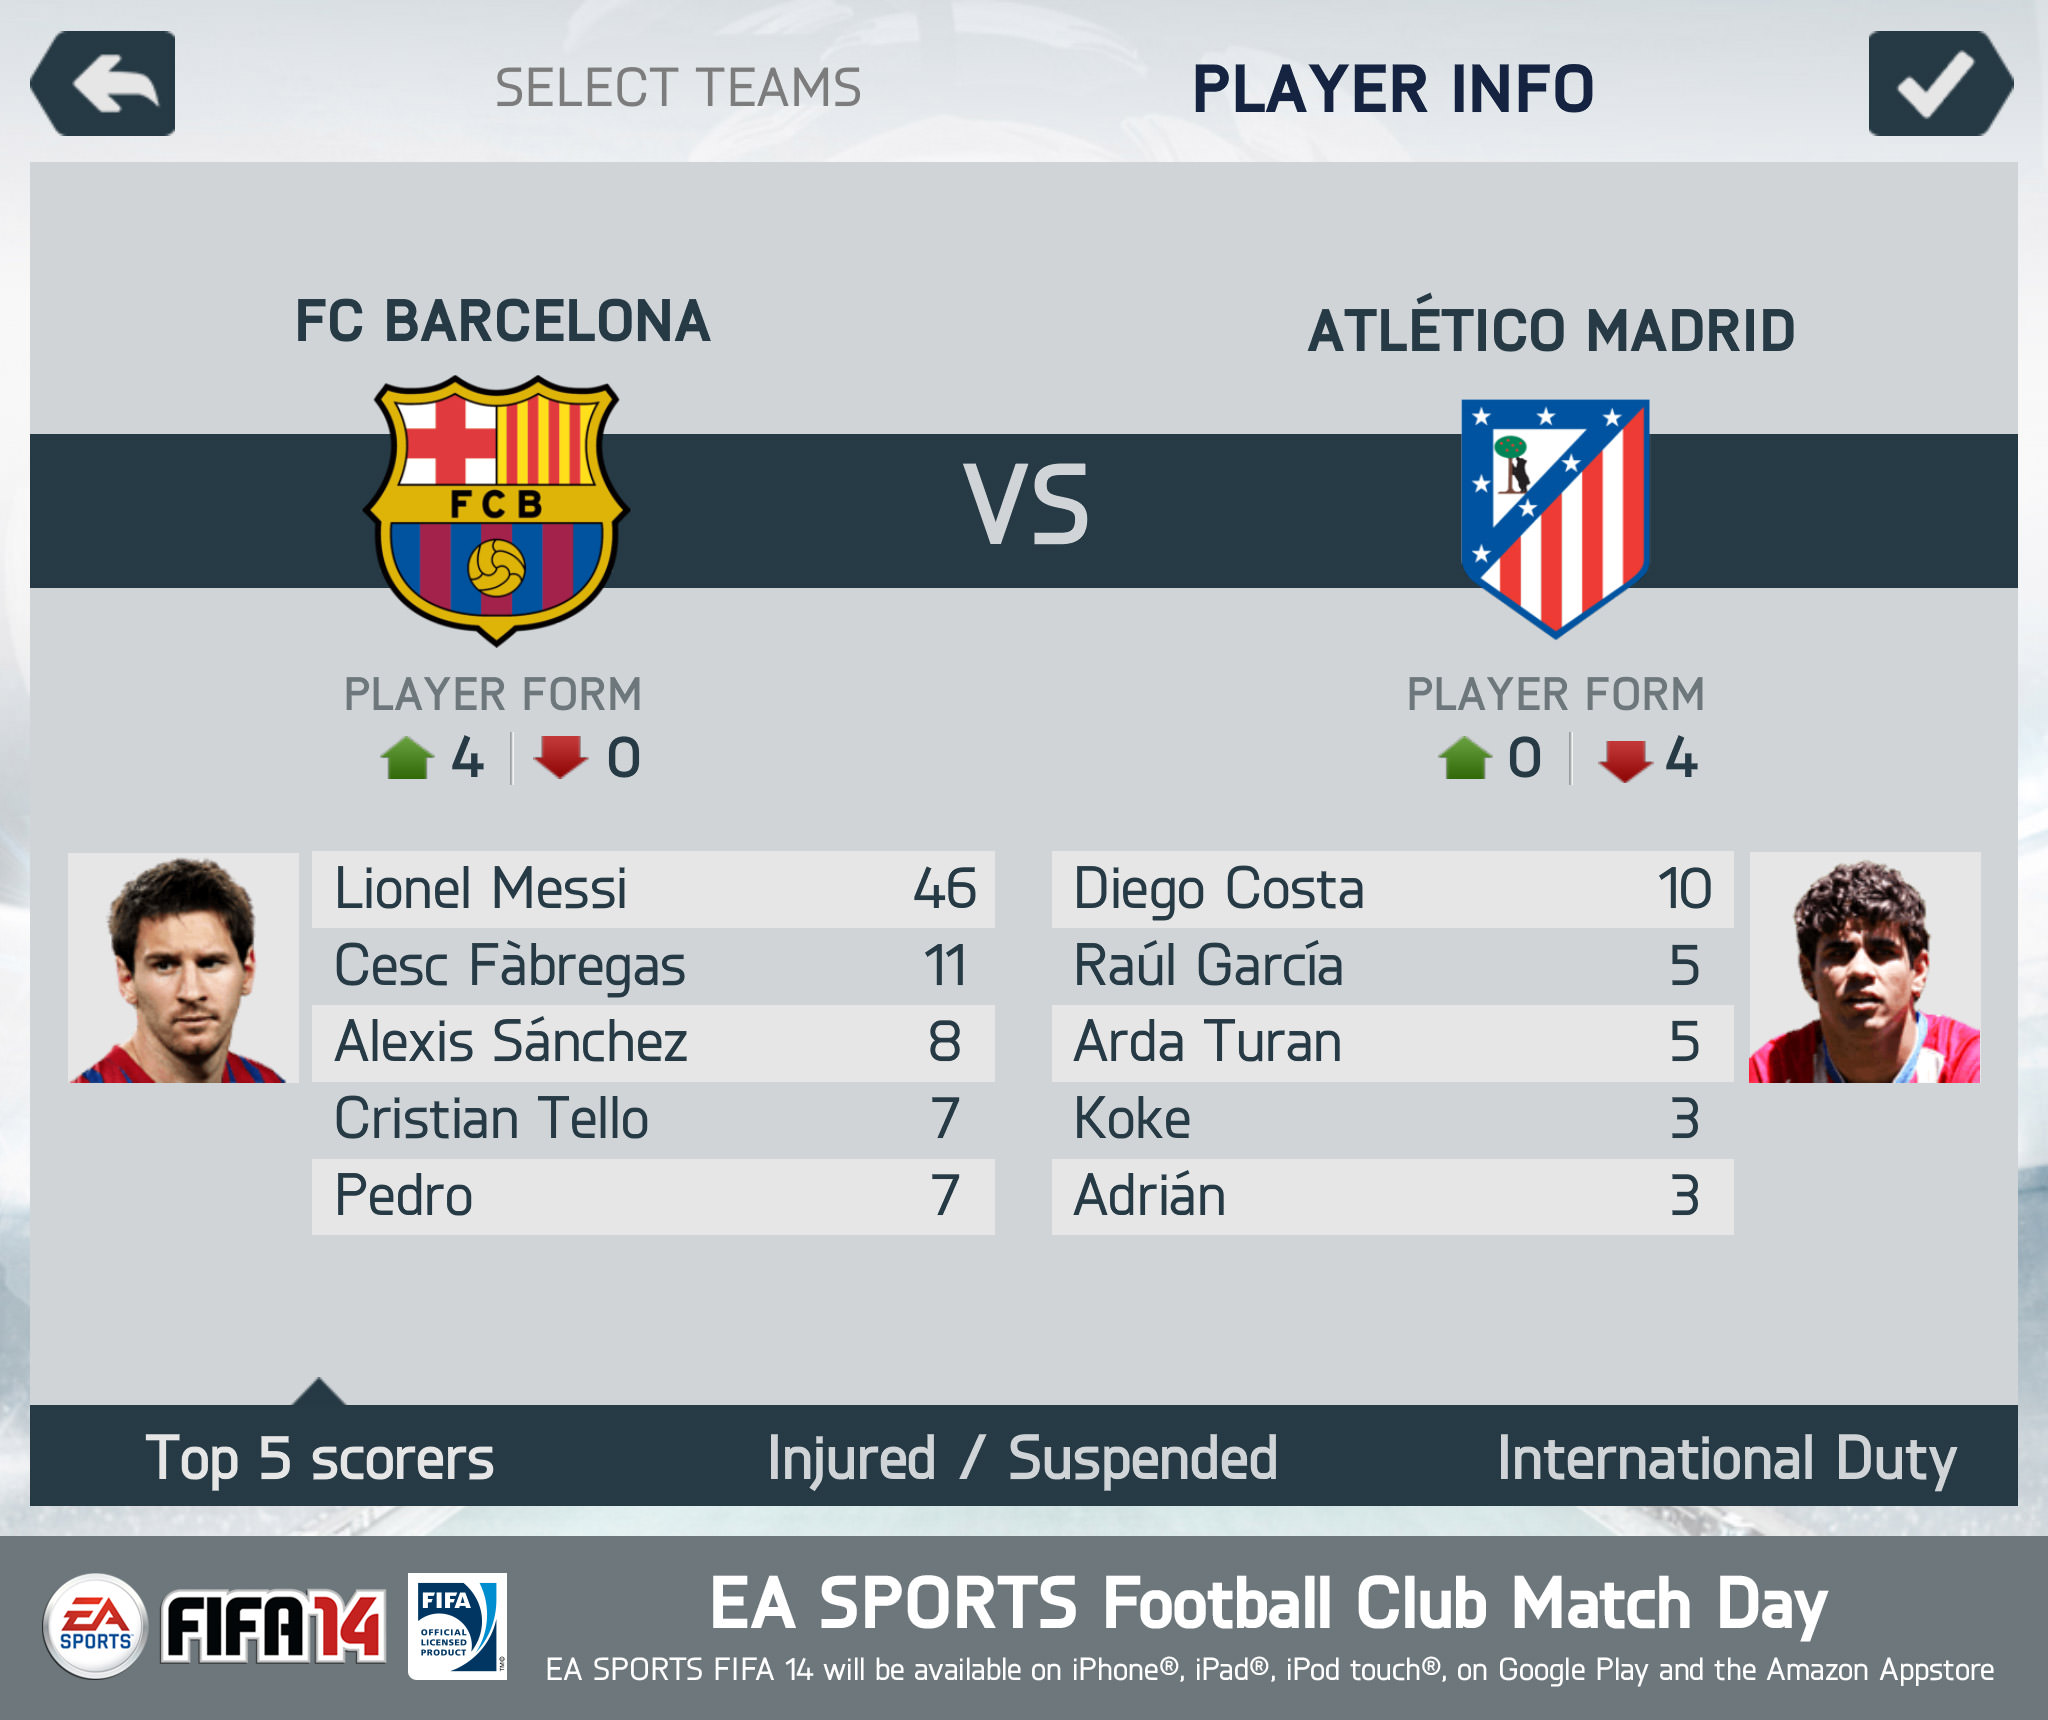 http://www.fifplay.com/images/public/fifa14-mobile-03.jpg